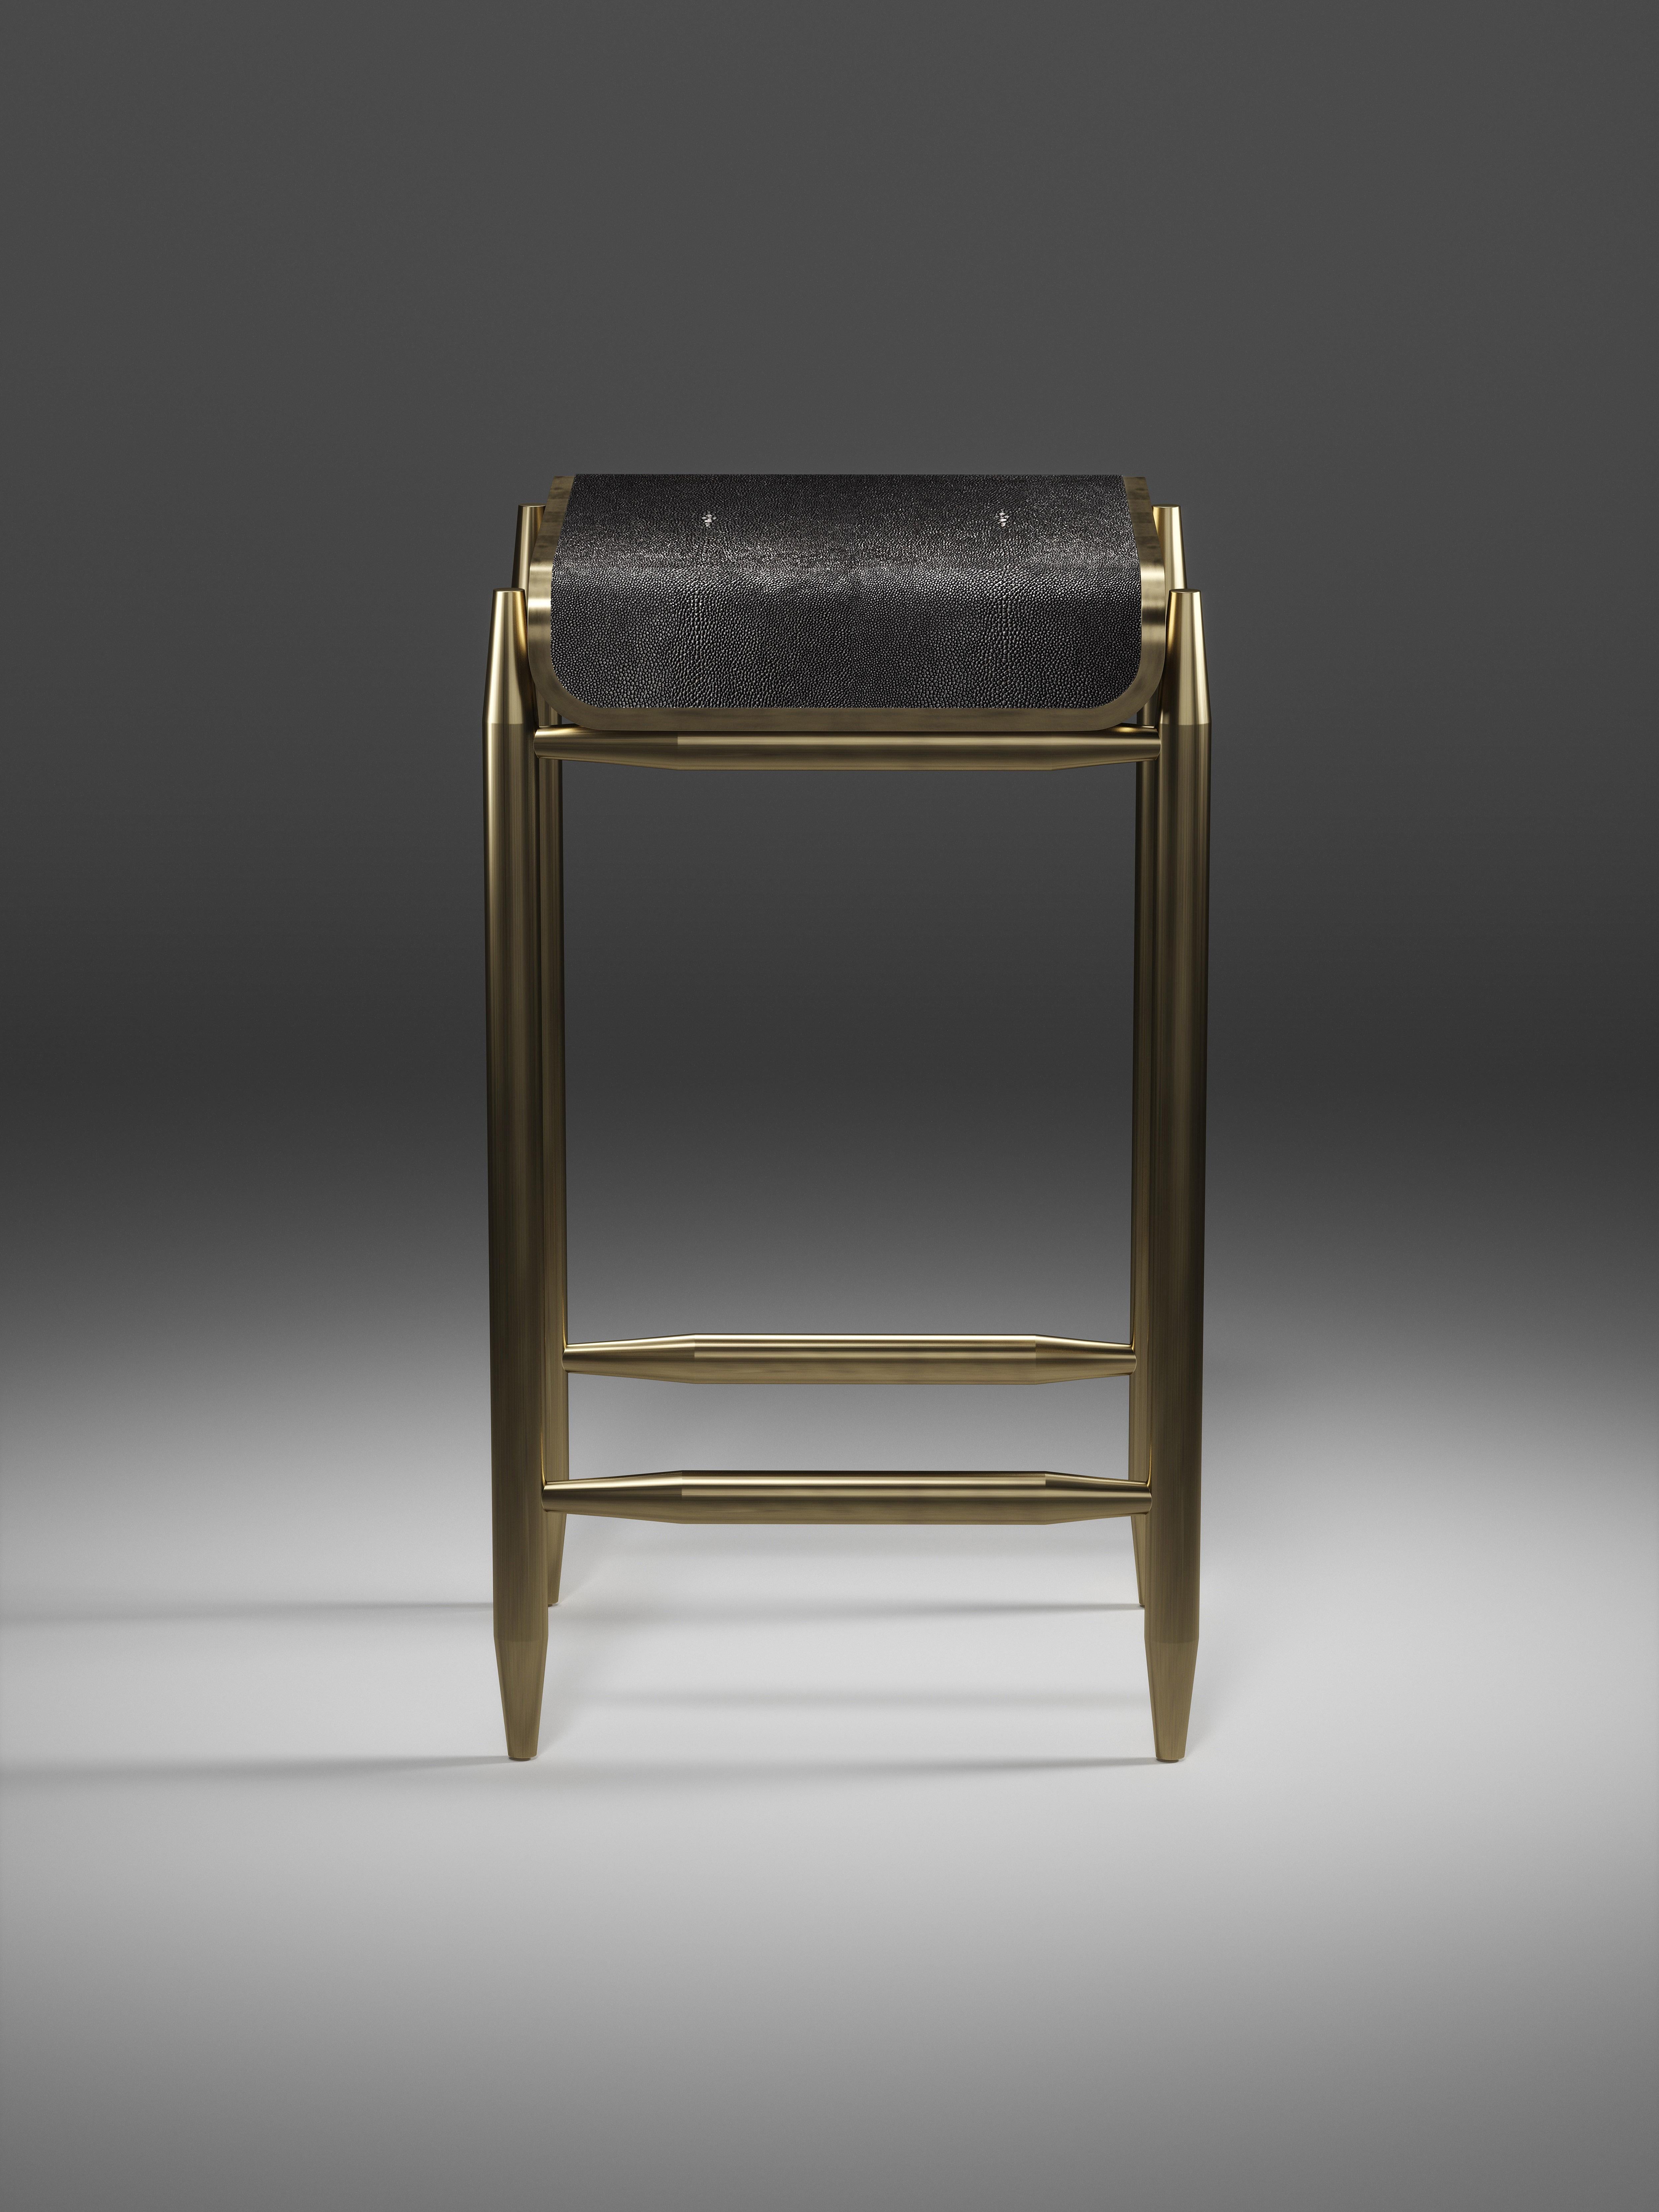 Inspired by the original Dandy Bench by KIFU PARIS (see images at end of slide), the Dandy II Bar Stool is the ultimate luxury seating. The seating area is inlaid in coal black shagreen and the frame and sides of the bar stool are completely inlaid